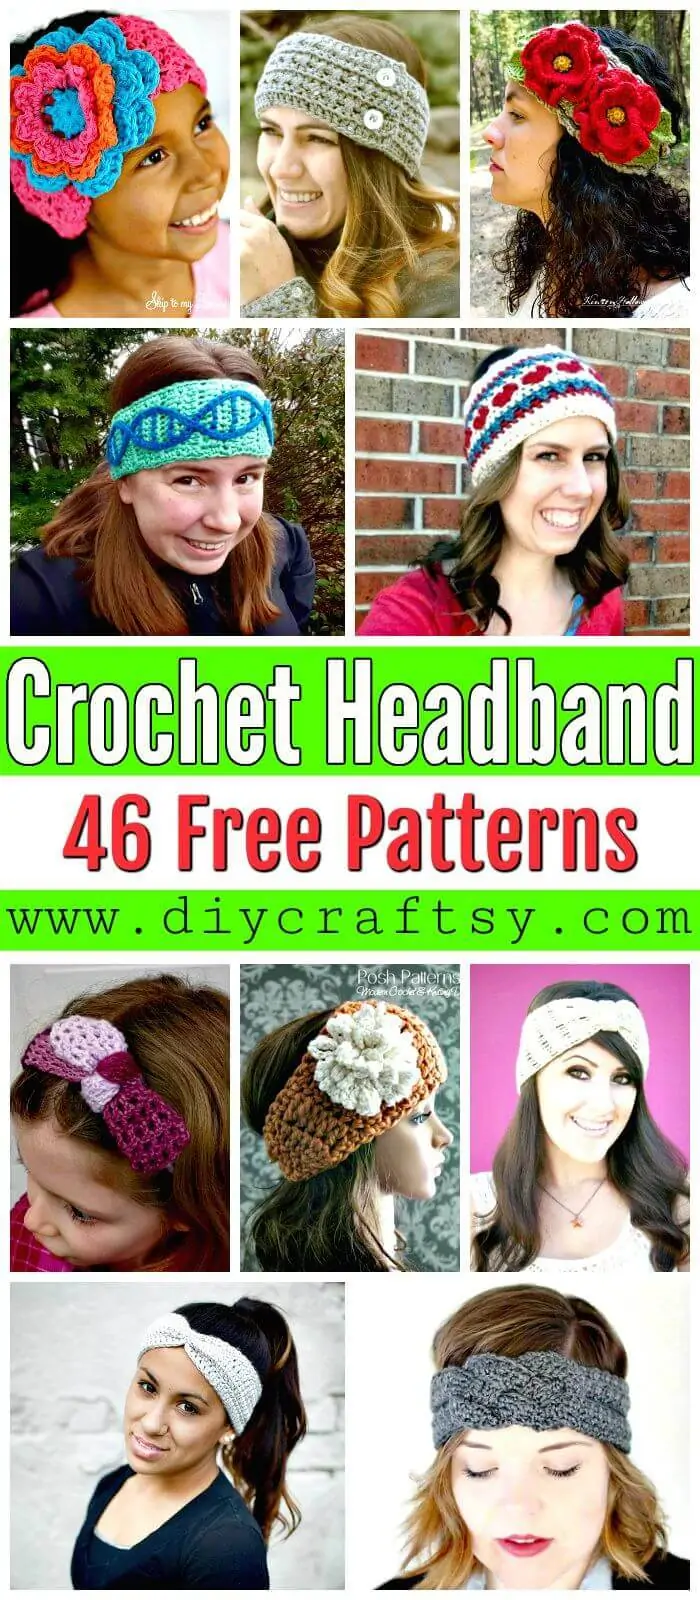 46-Free-Crochet-Headband-Patterns-to-Try-This-Weekend